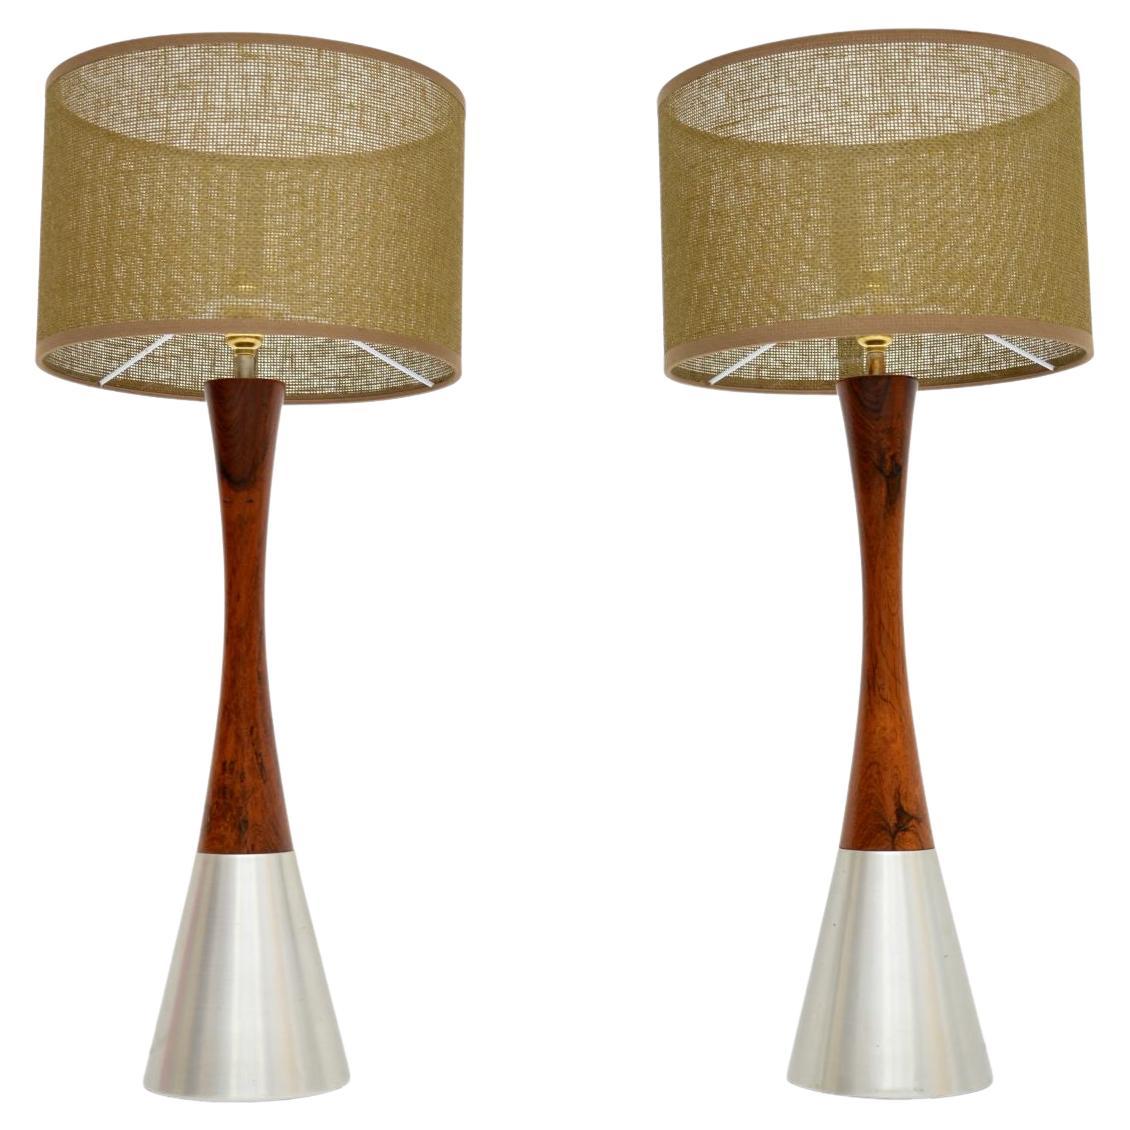 1960's Pair of Swedish Table Lamps by Bergboms